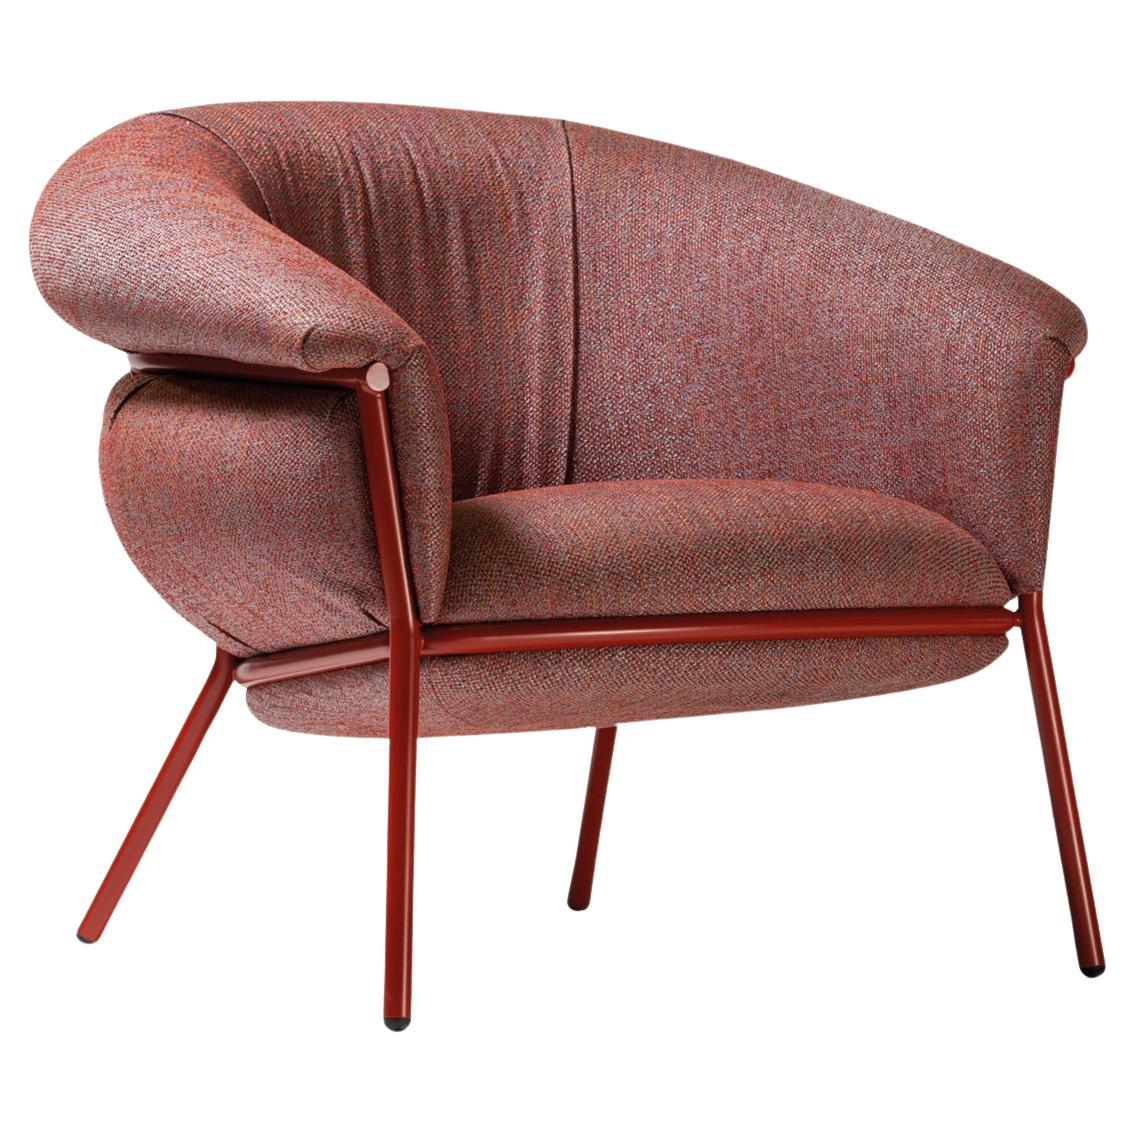 Grasso Armchair by Stephen Burks padded red upholstery with a red metal structur For Sale